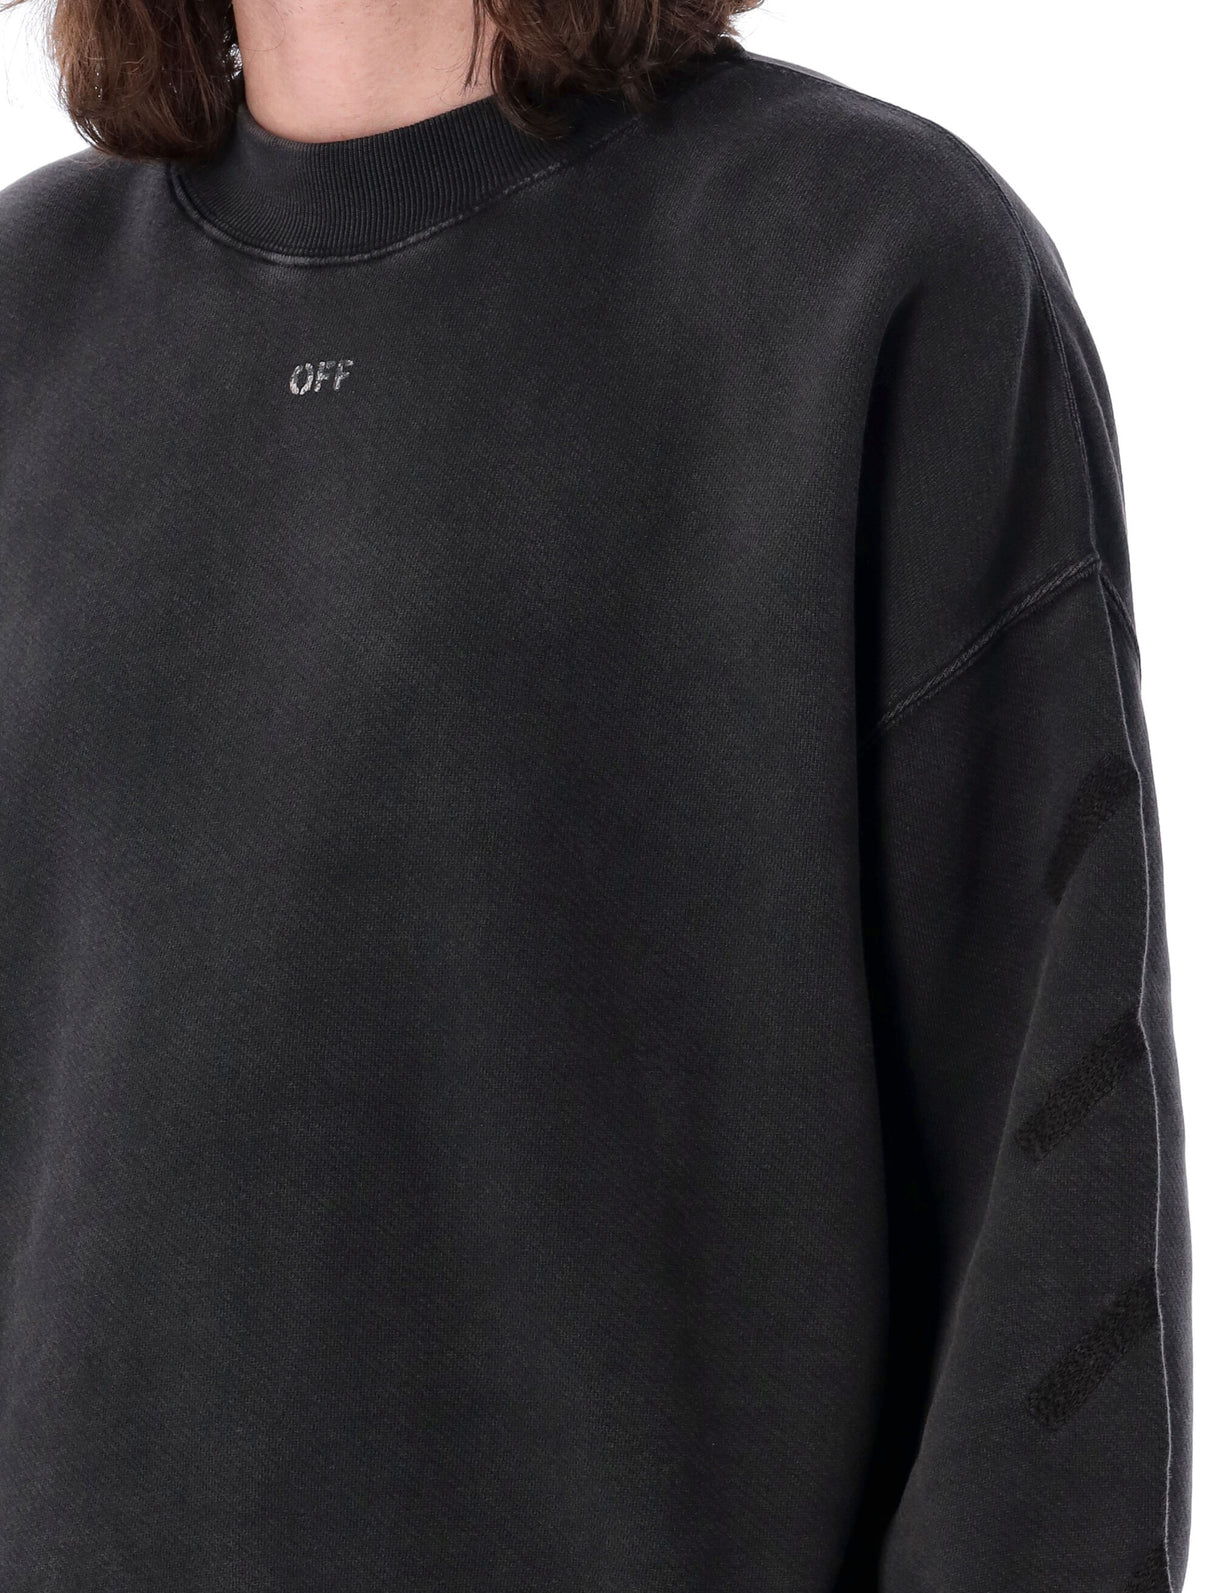 Black and Grey Crewneck Sweatshirt for Men by OFF-WHITE